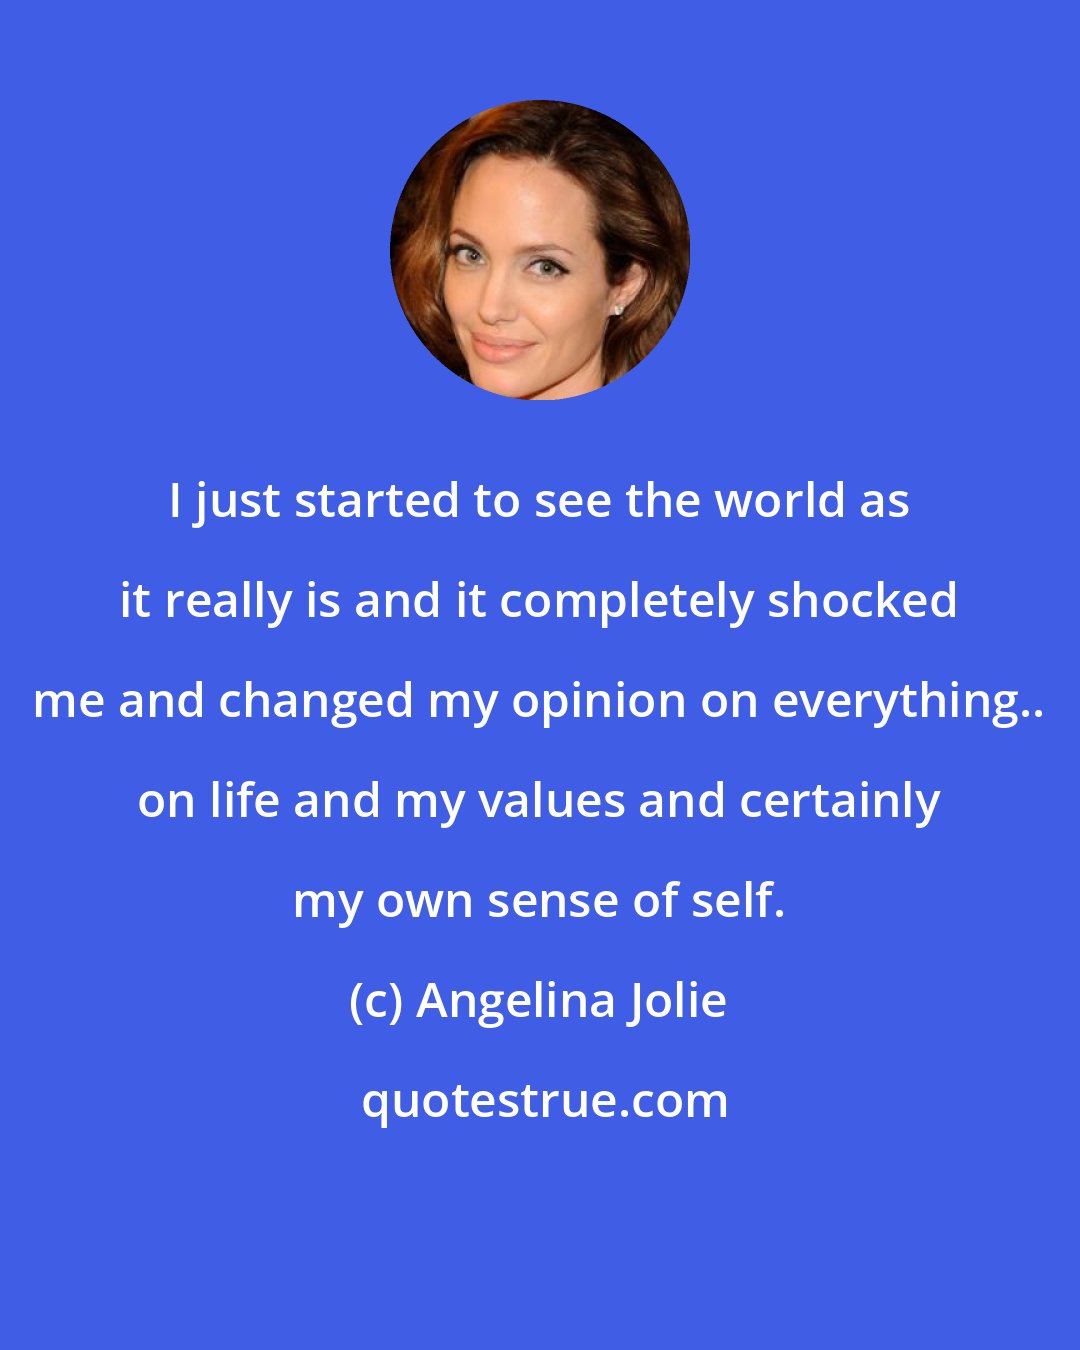 Angelina Jolie: I just started to see the world as it really is and it completely shocked me and changed my opinion on everything.. on life and my values and certainly my own sense of self.